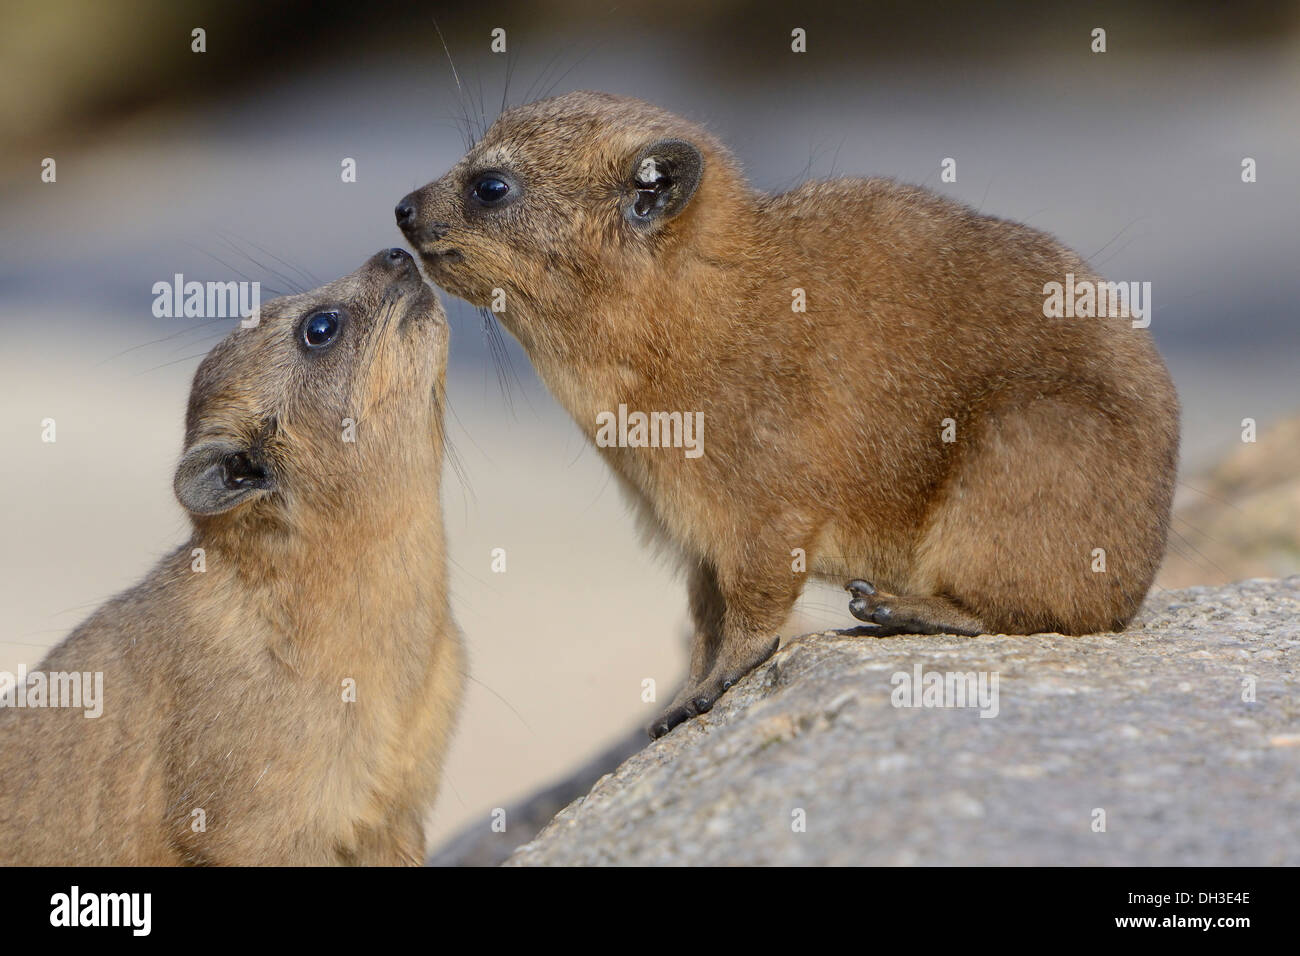 Two Rock Hyraxes or Cape Hyraxes (Procavia capensis), Baden-Württemberg, Germany Stock Photo